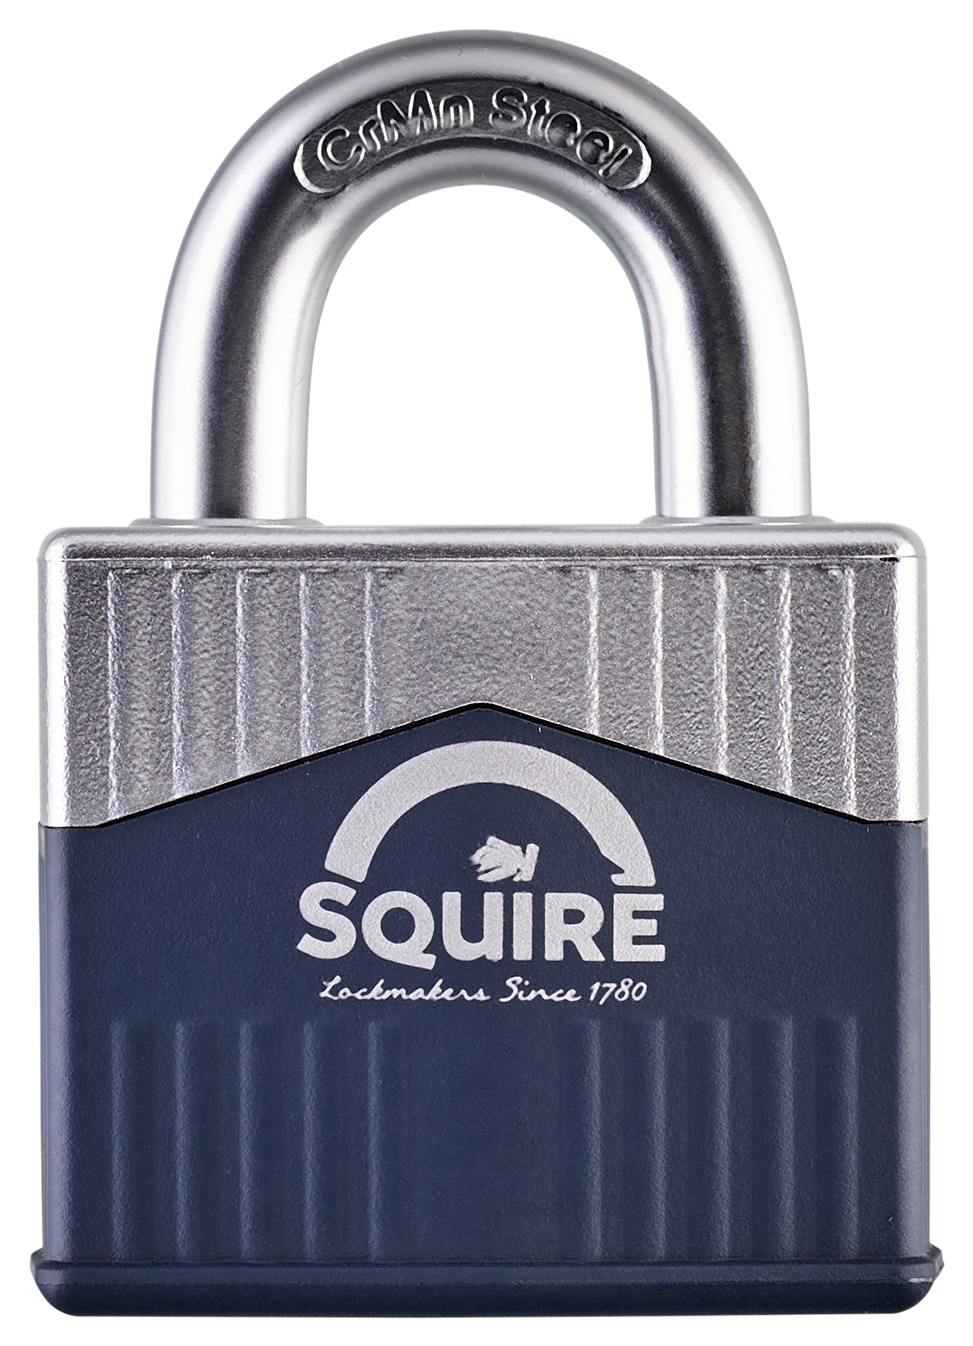 Squire Solid Diecast Body with Boron Shackle Padlock - 55mm